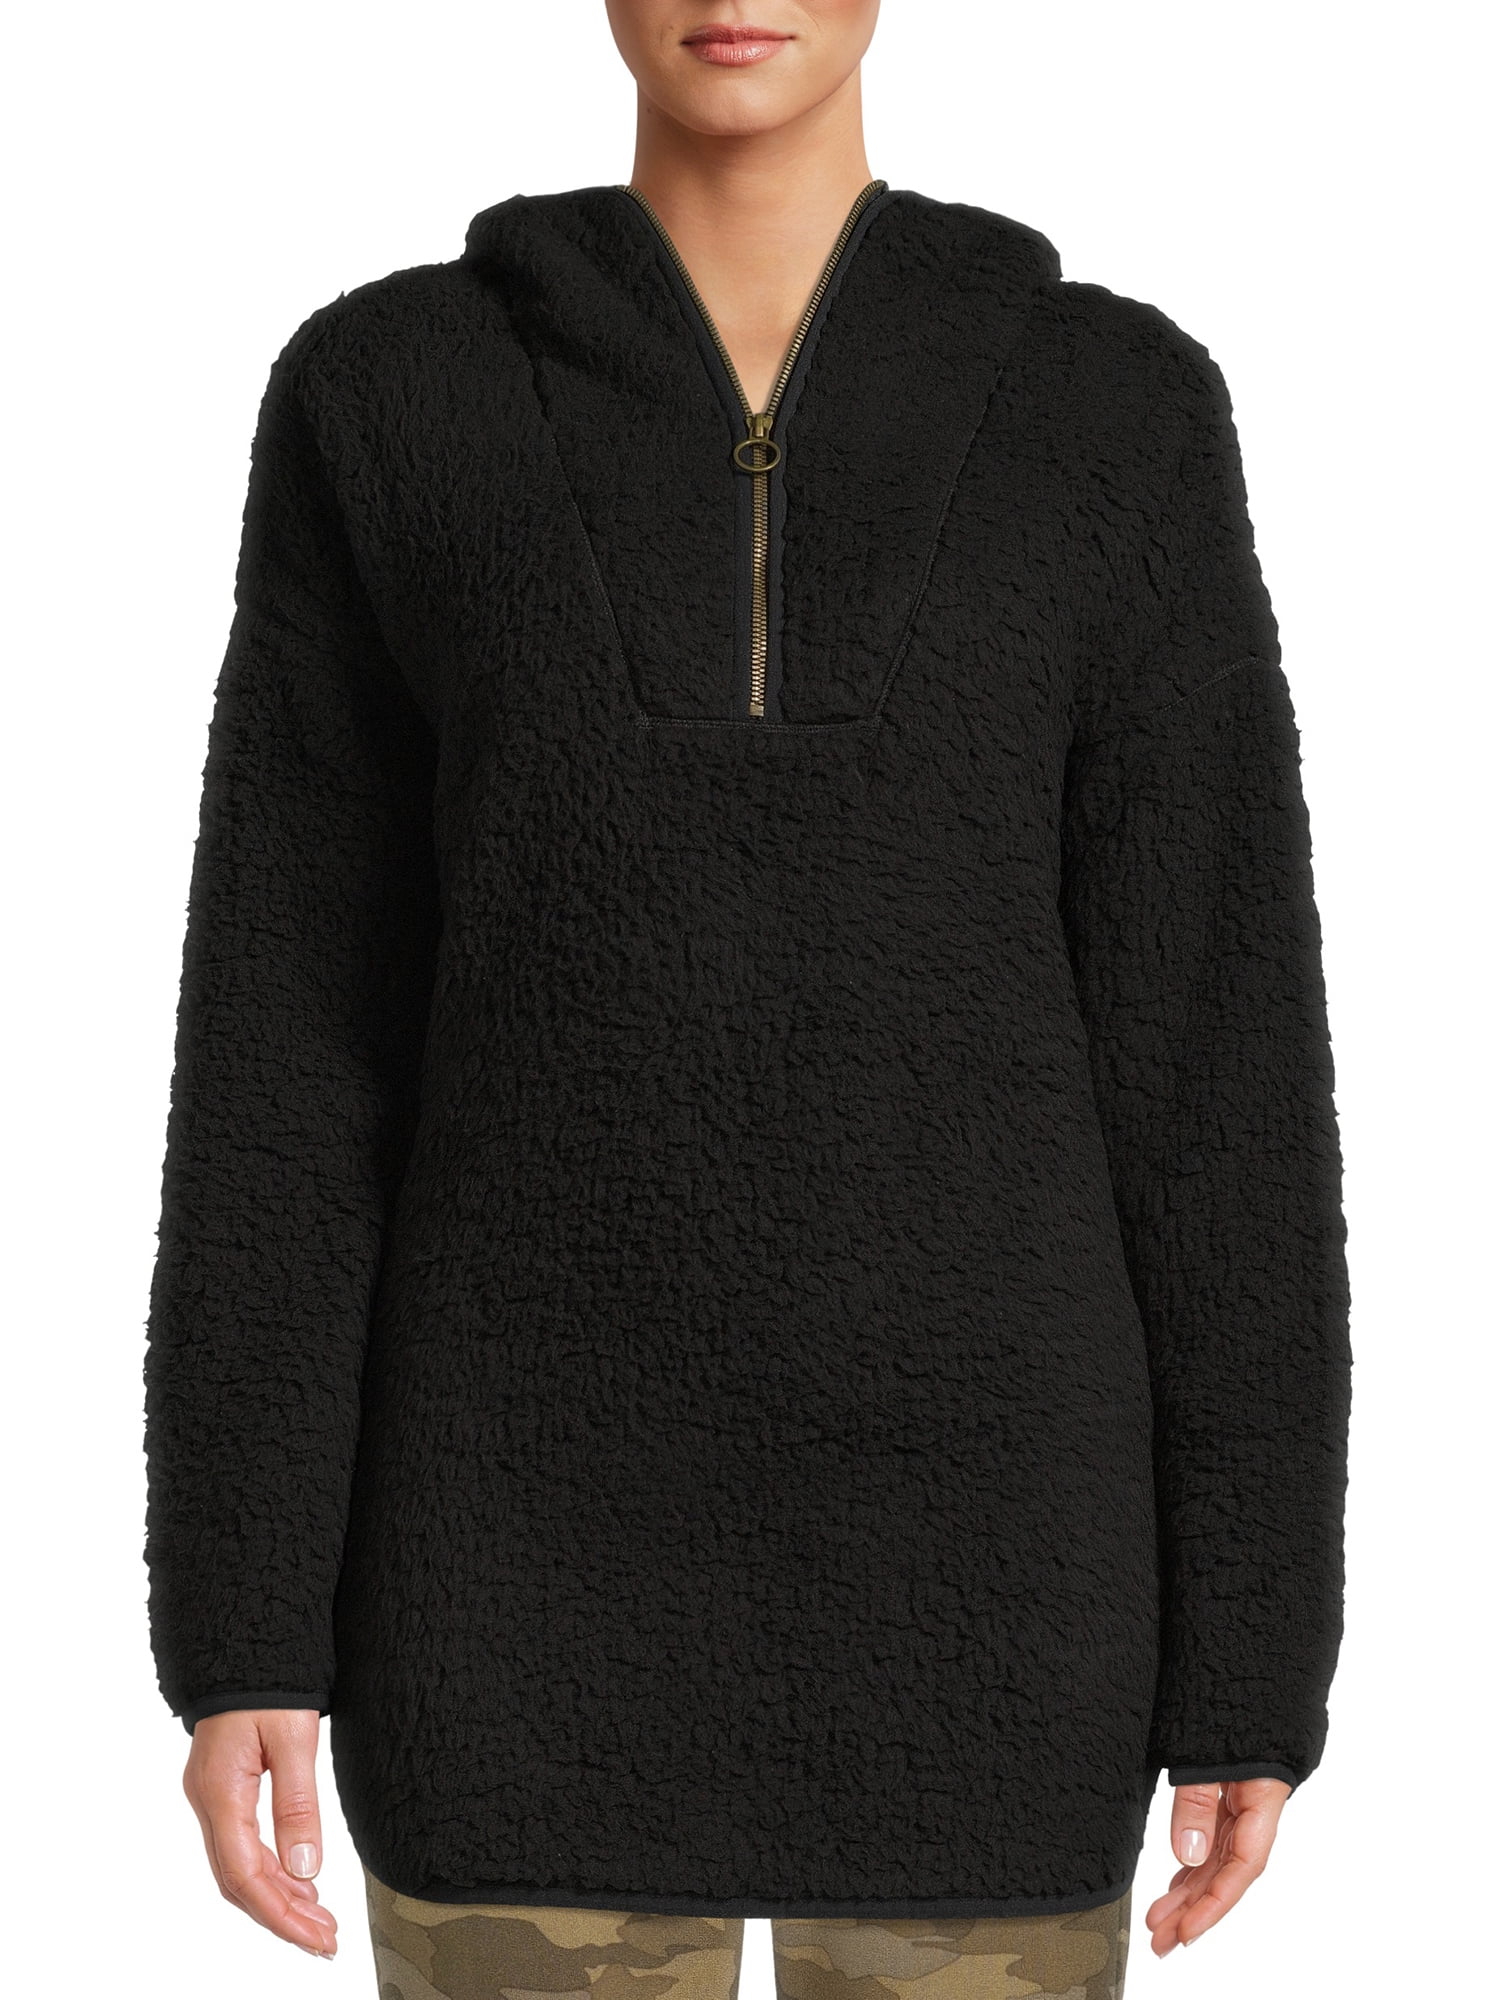 Athletic Works Women's Tunic Sherpa